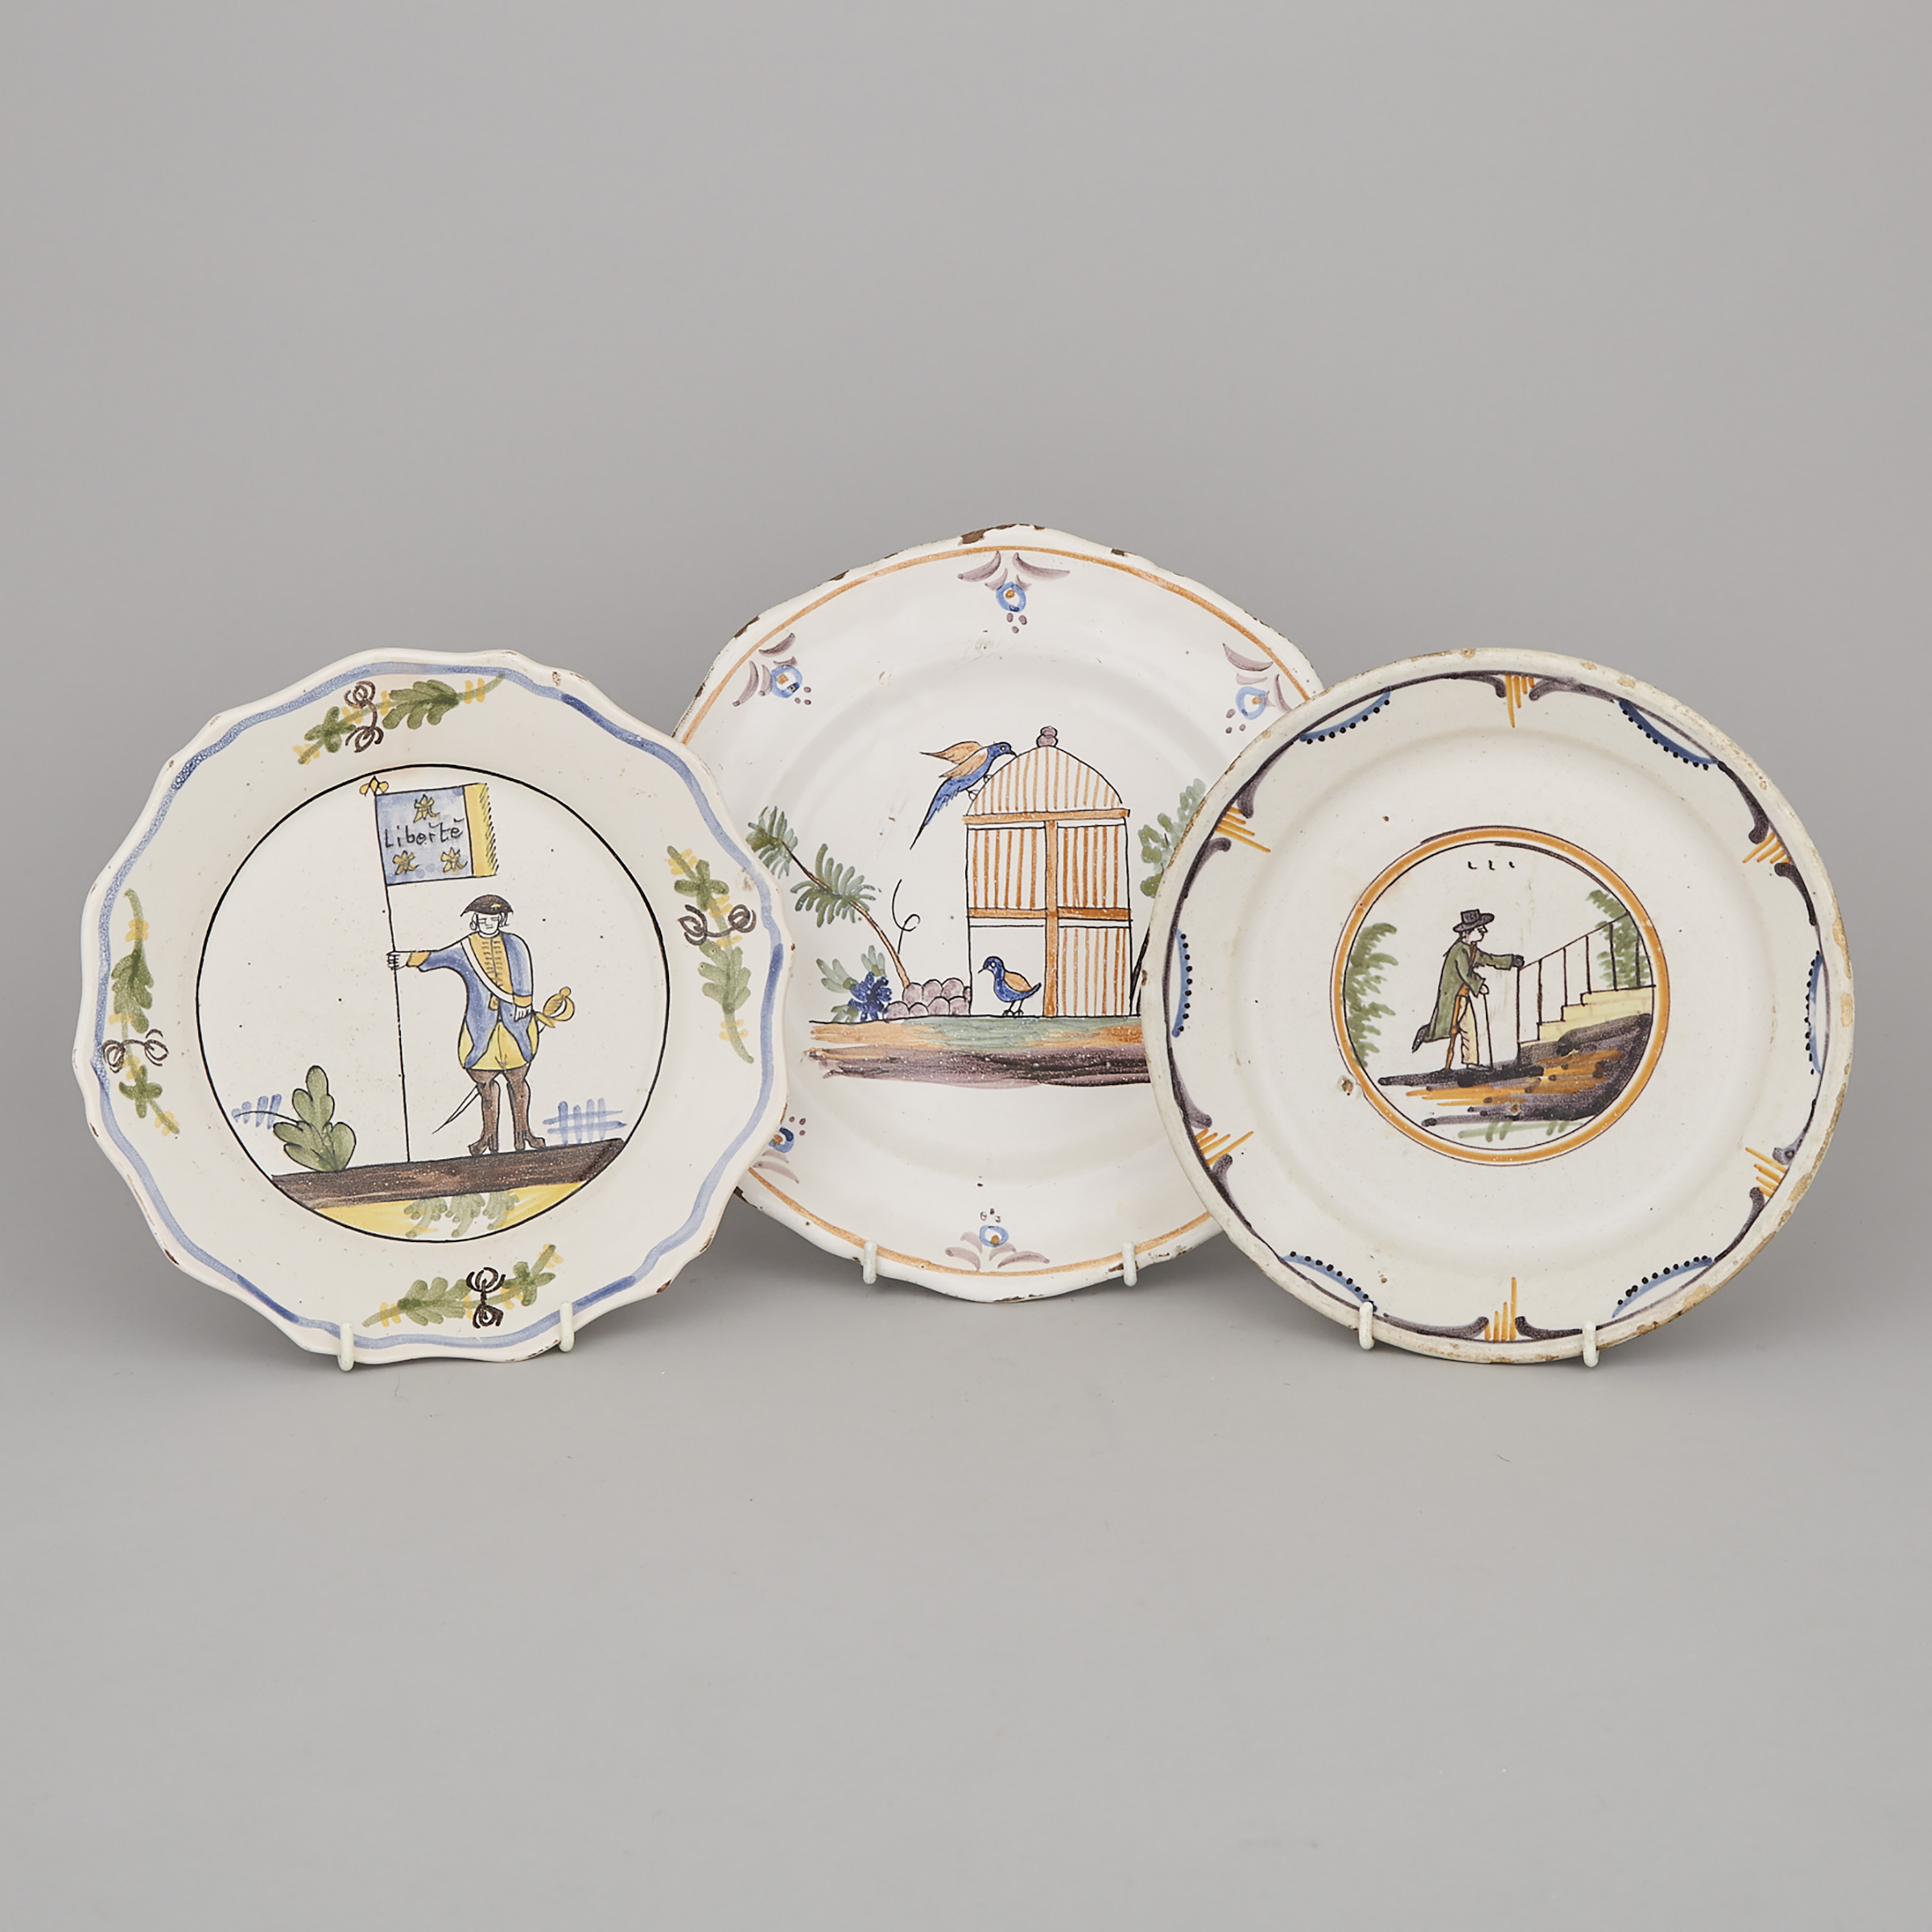 Three French Faience Polychrome Plates, late 18th/early 19th century